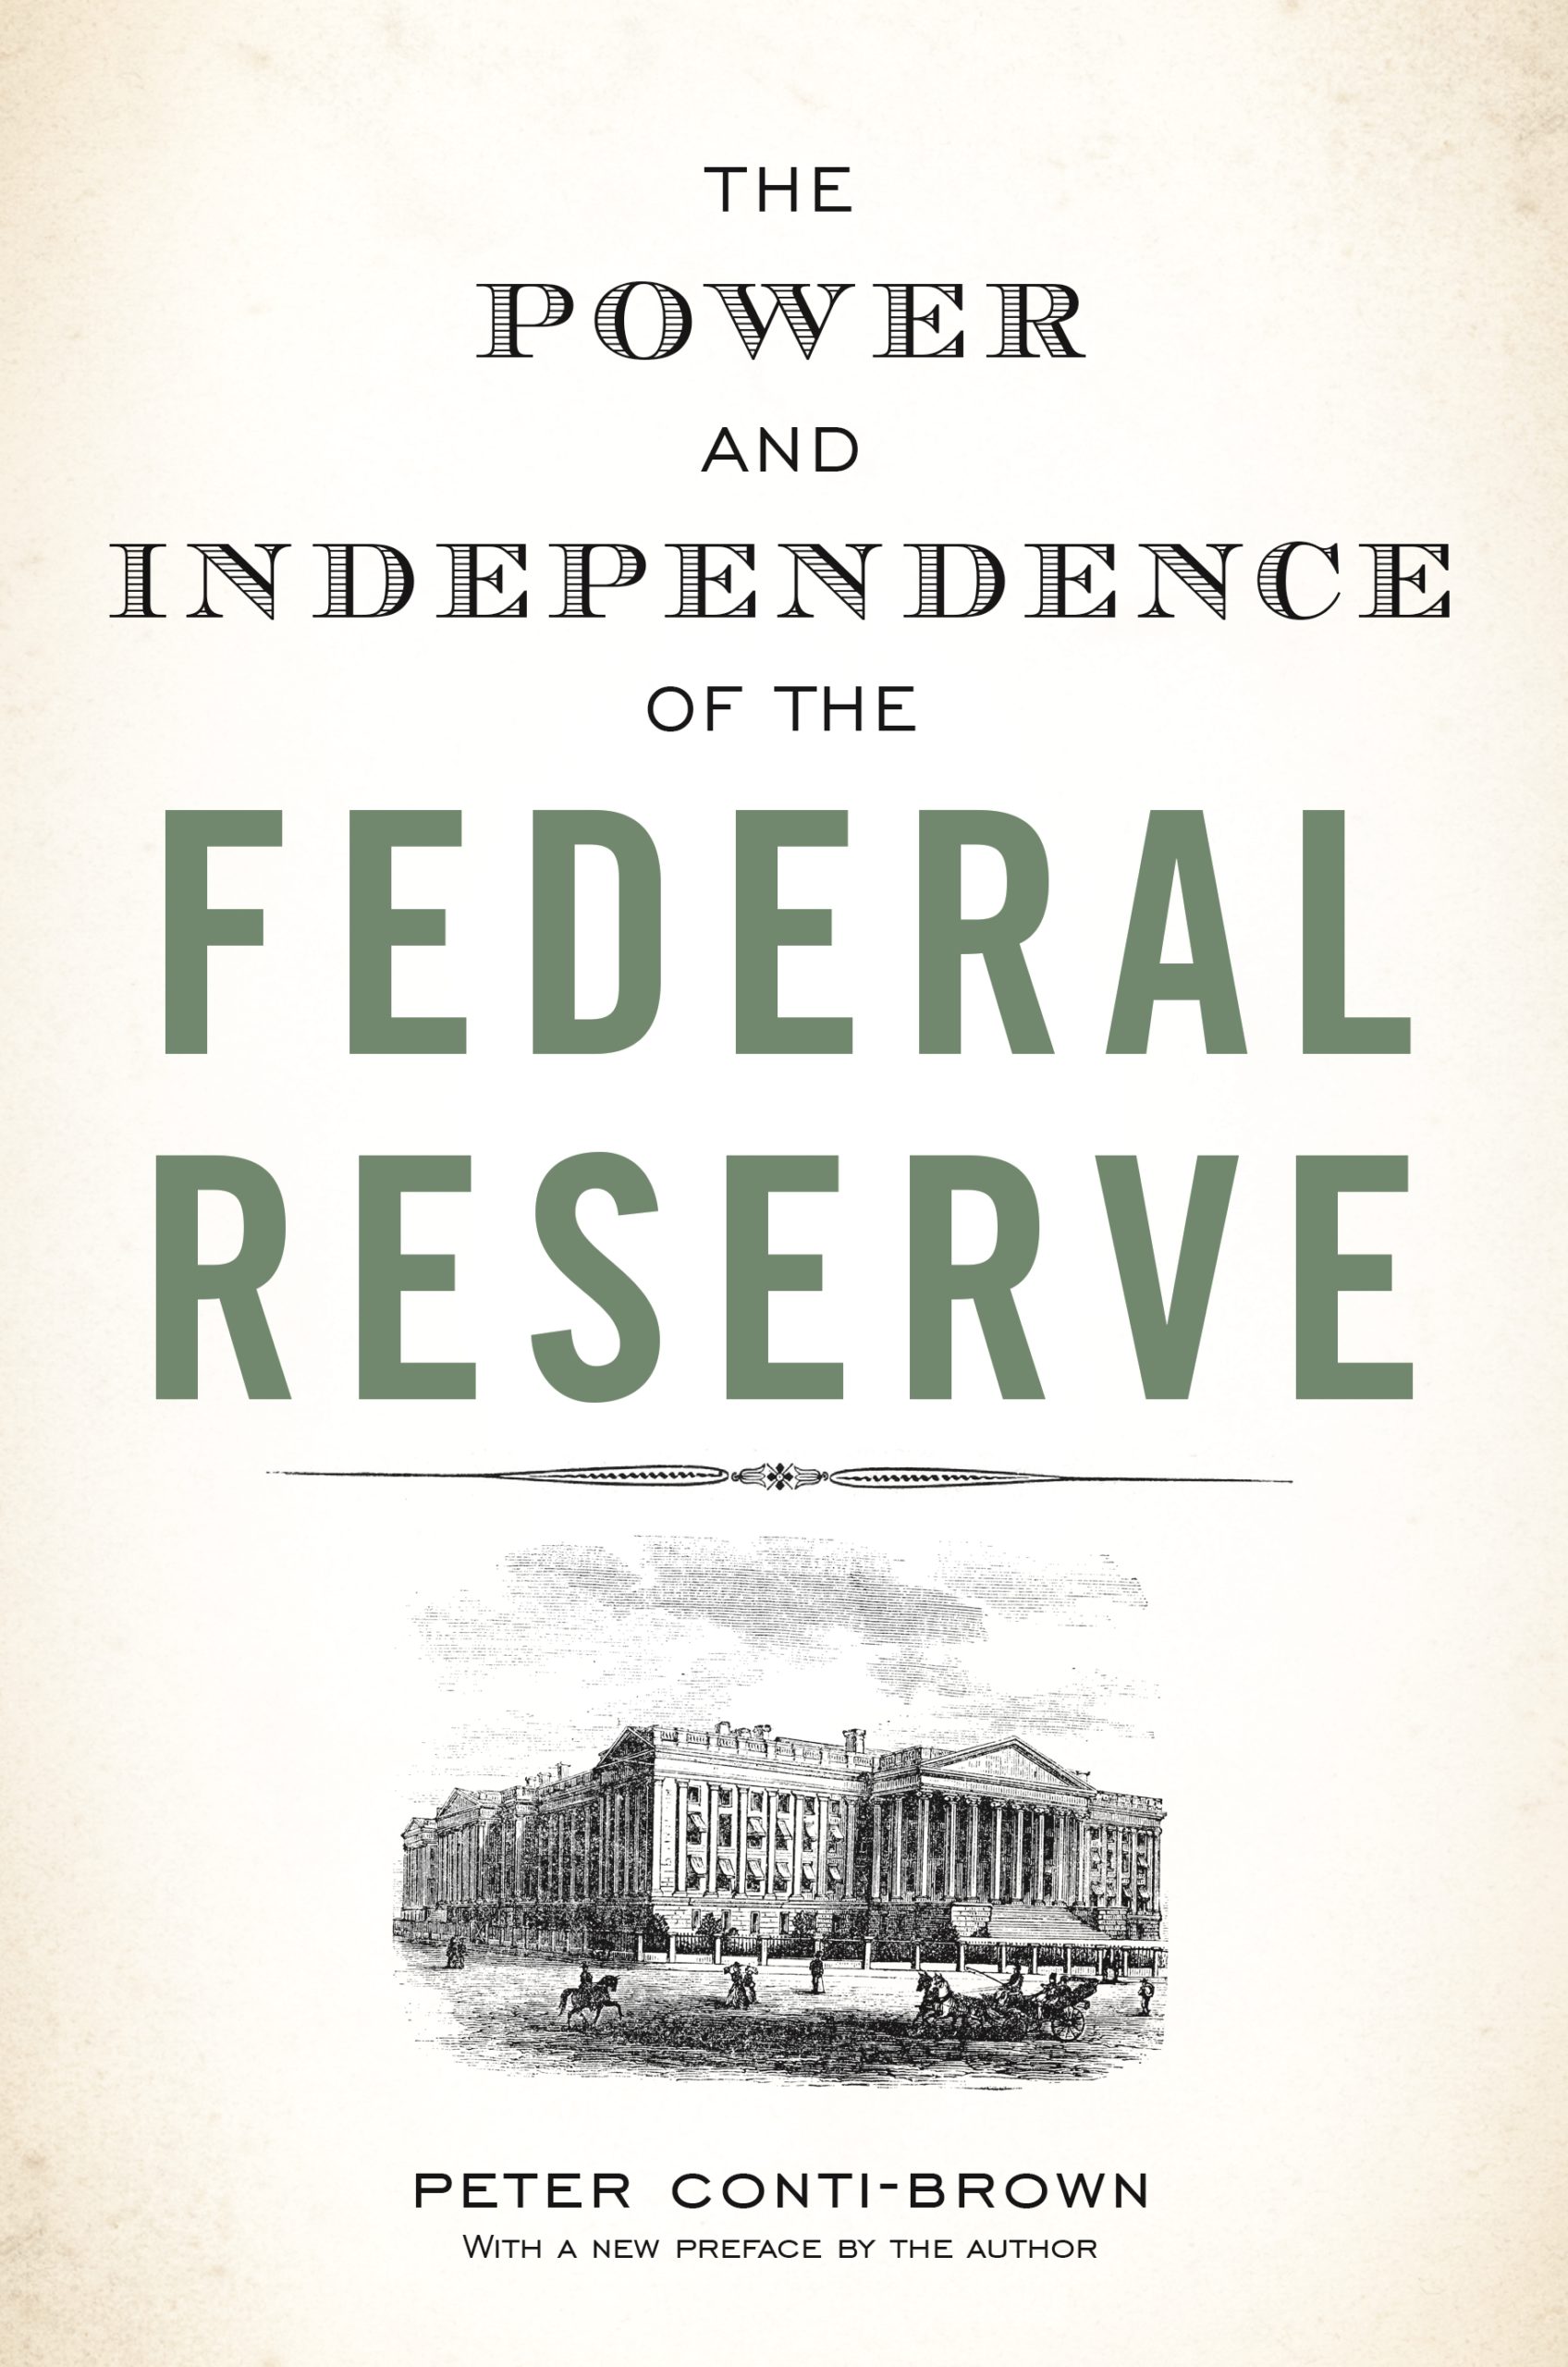 The Power and Independence of the Federal Reserve